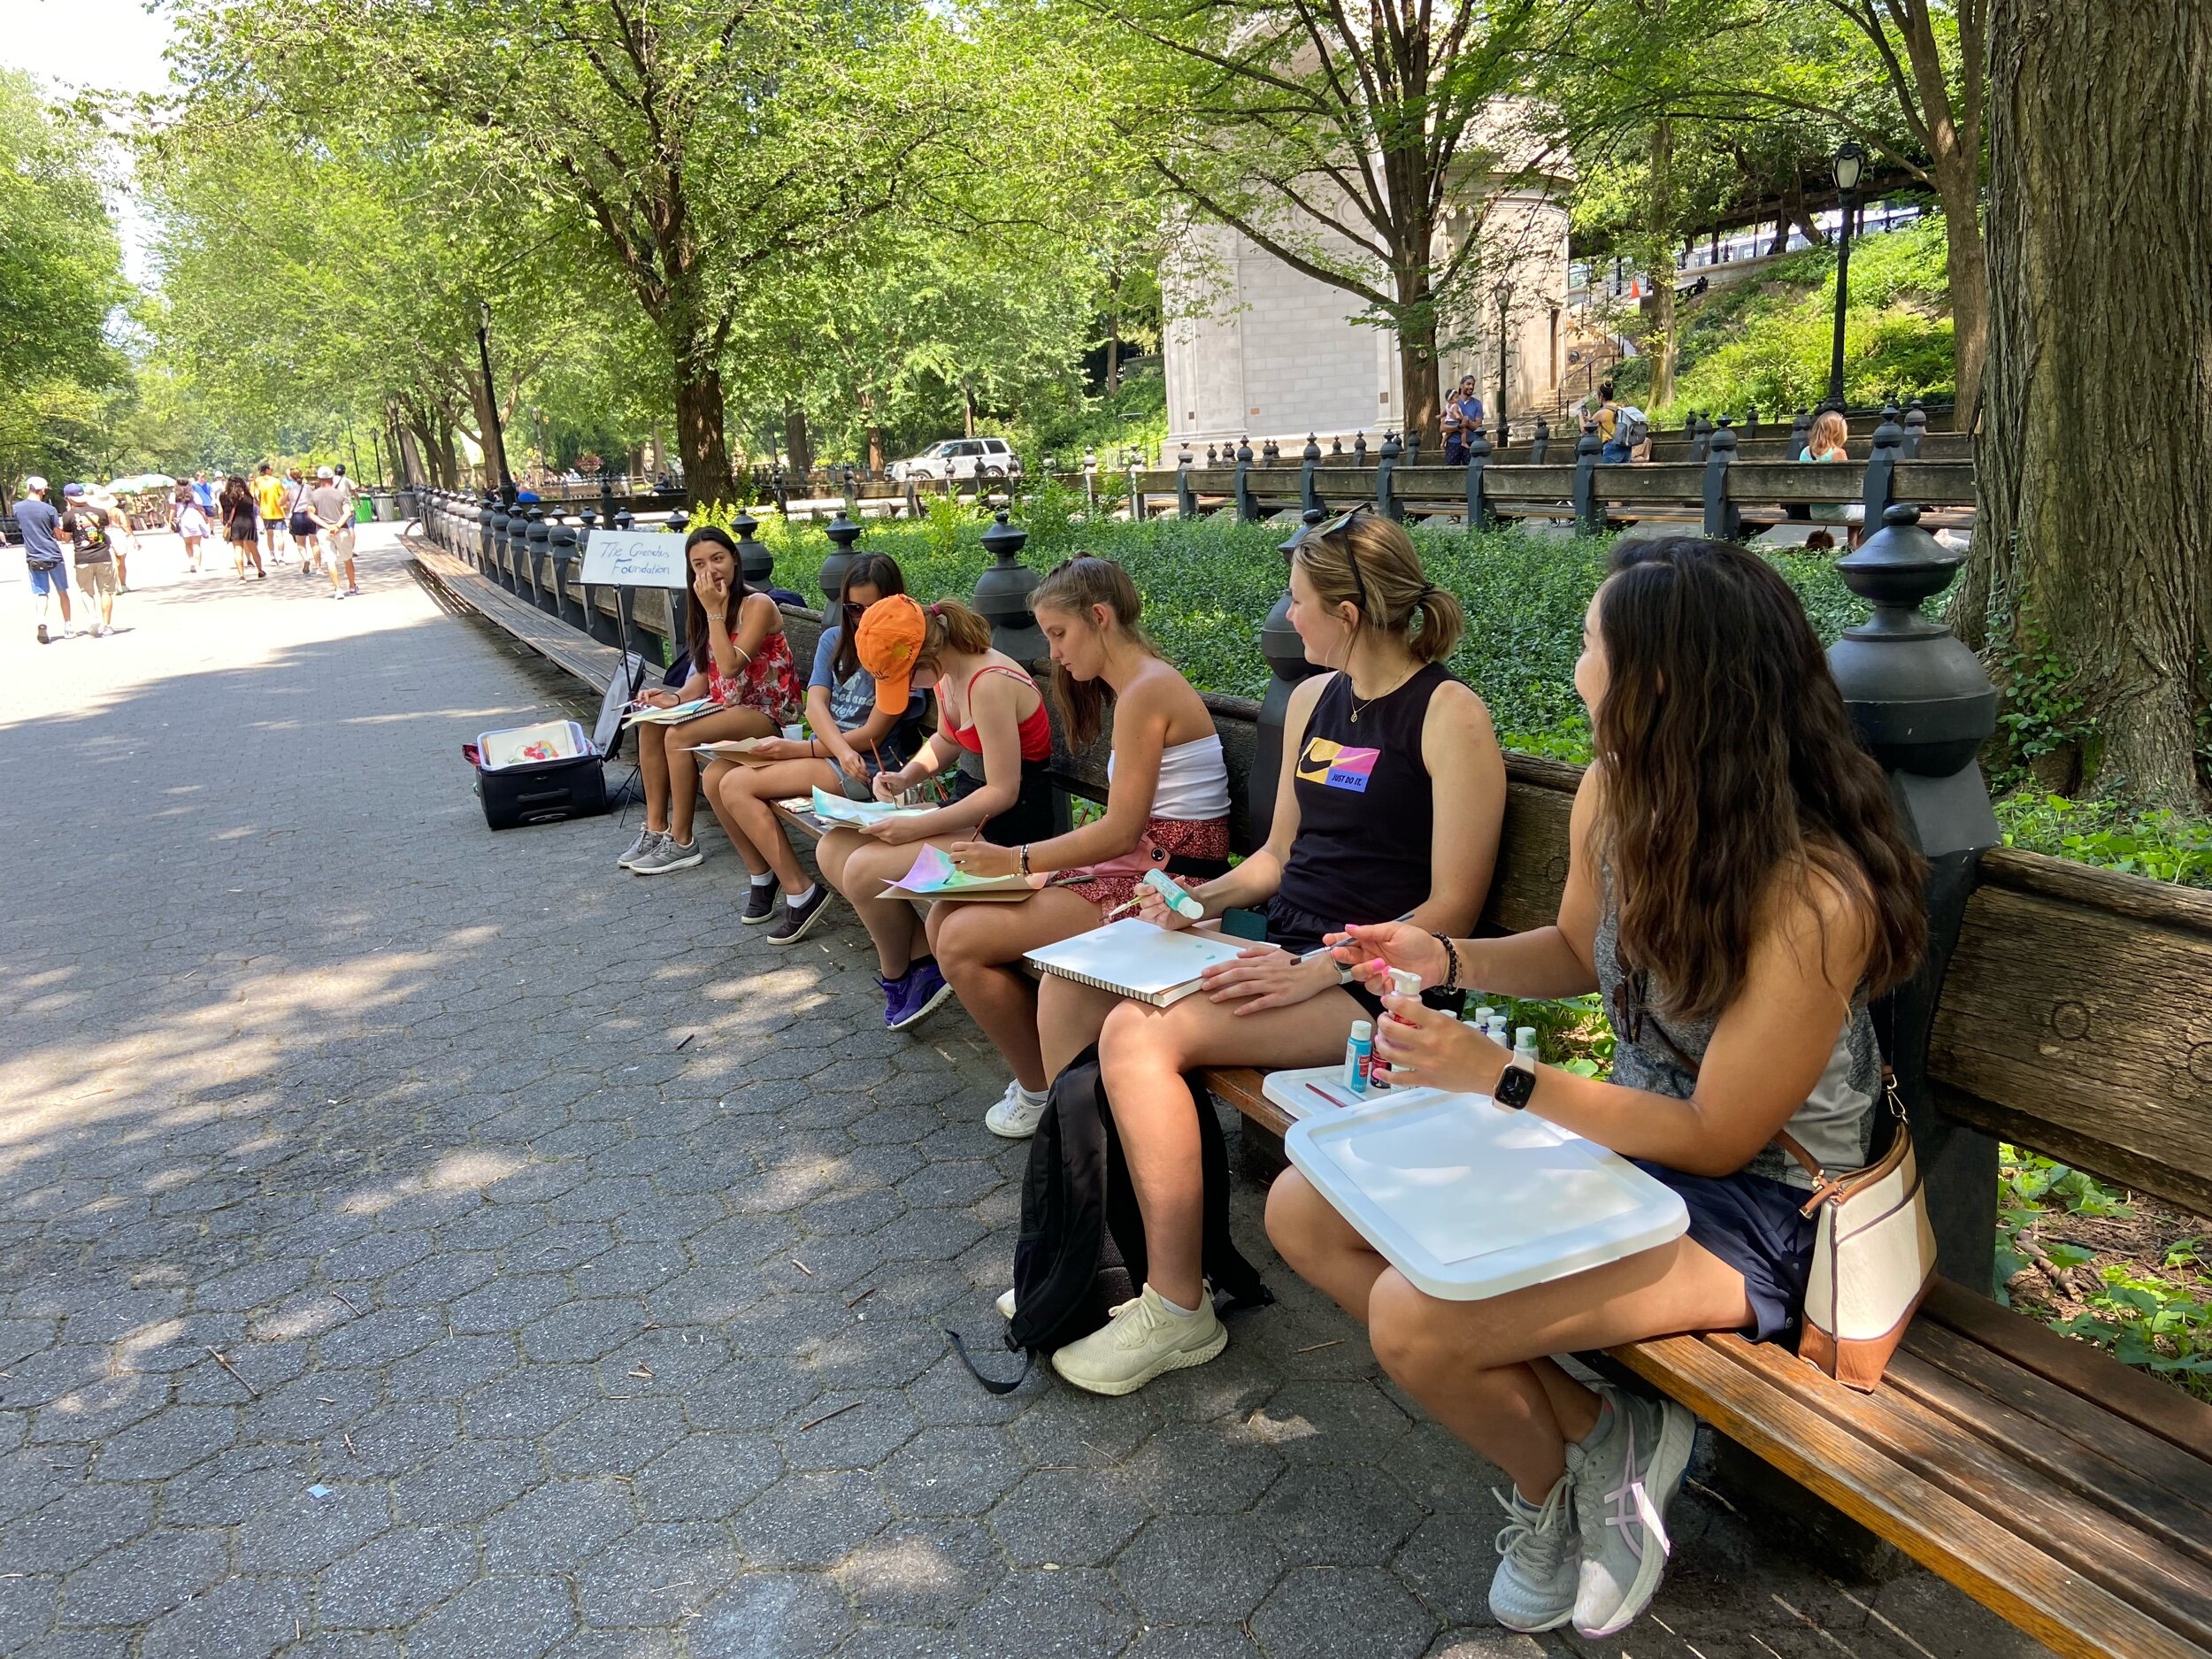 6 Girls on the Bench-Creating Artwork with each other - iintermingling with each other across states, borders, and international spaces and places!! Learning from each other and the beauty of creating